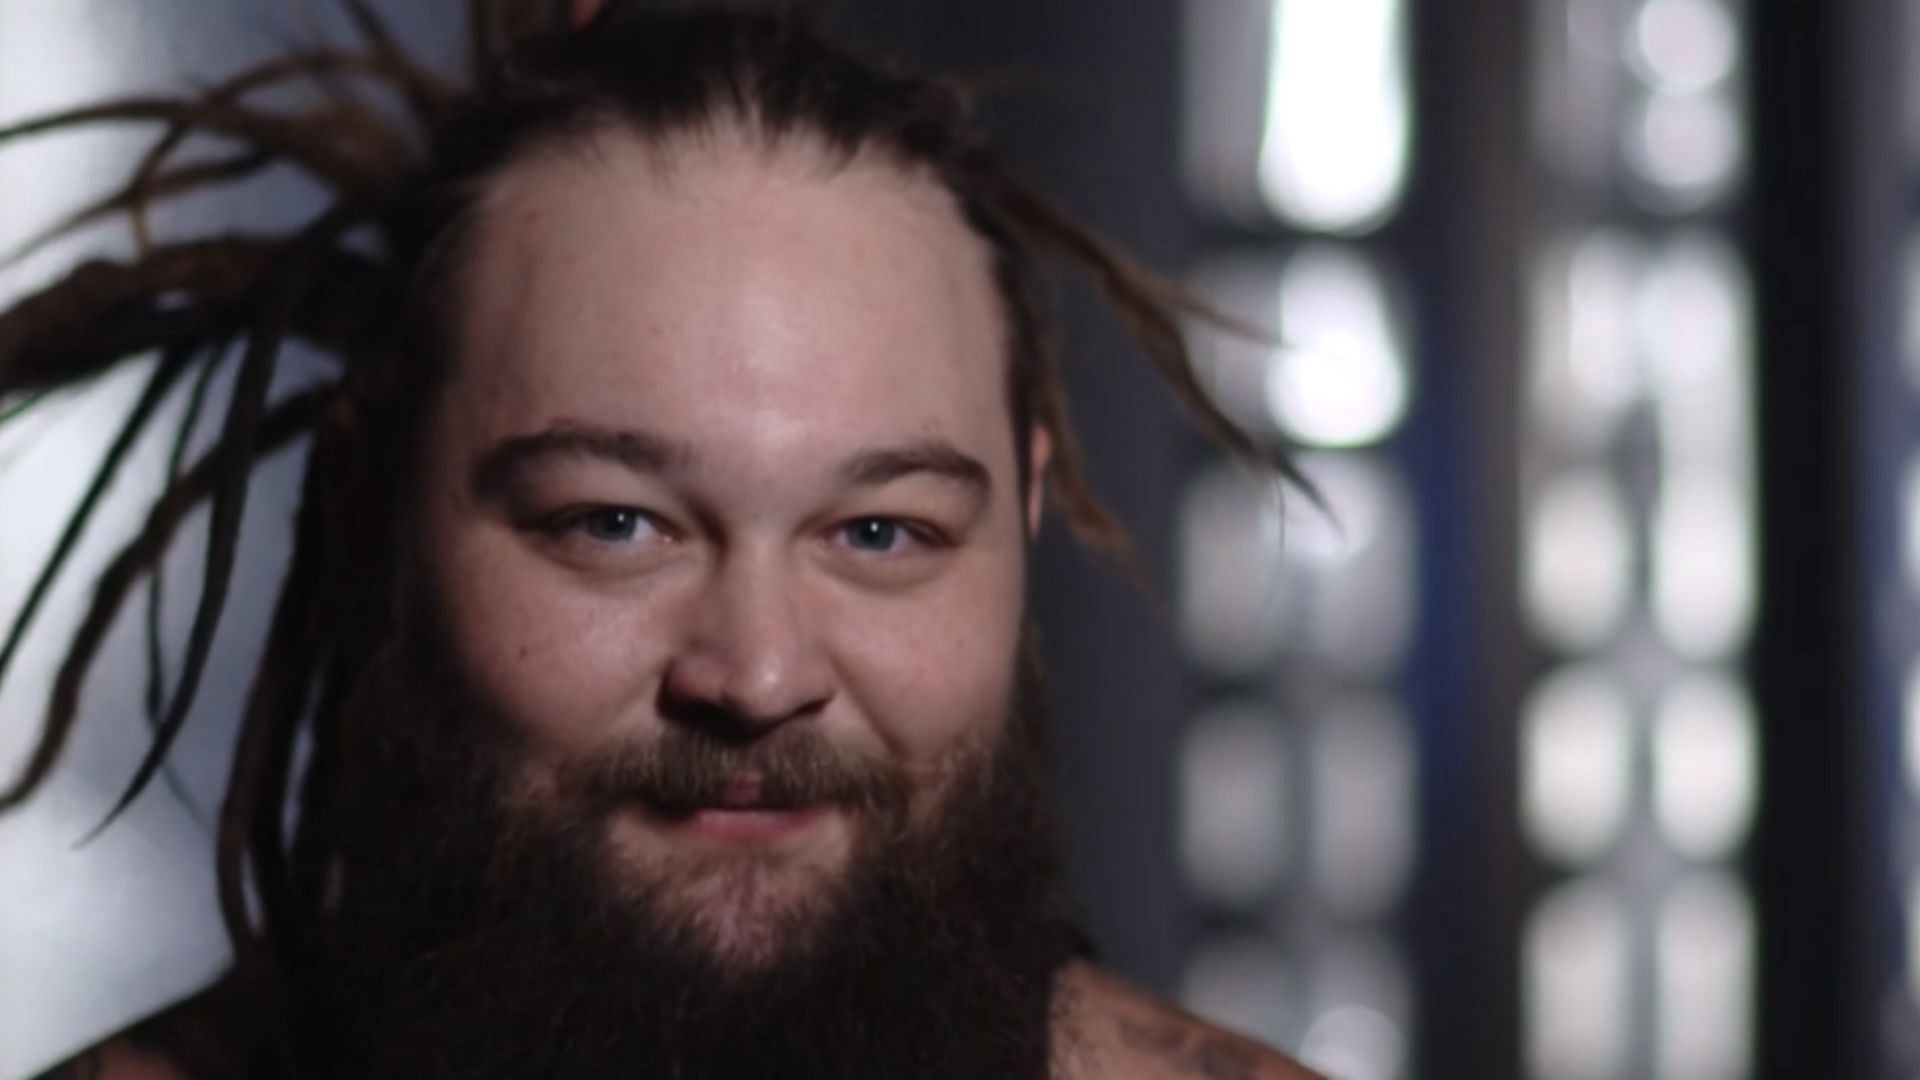 Bray Wyatt received his release from WWE in July 2021